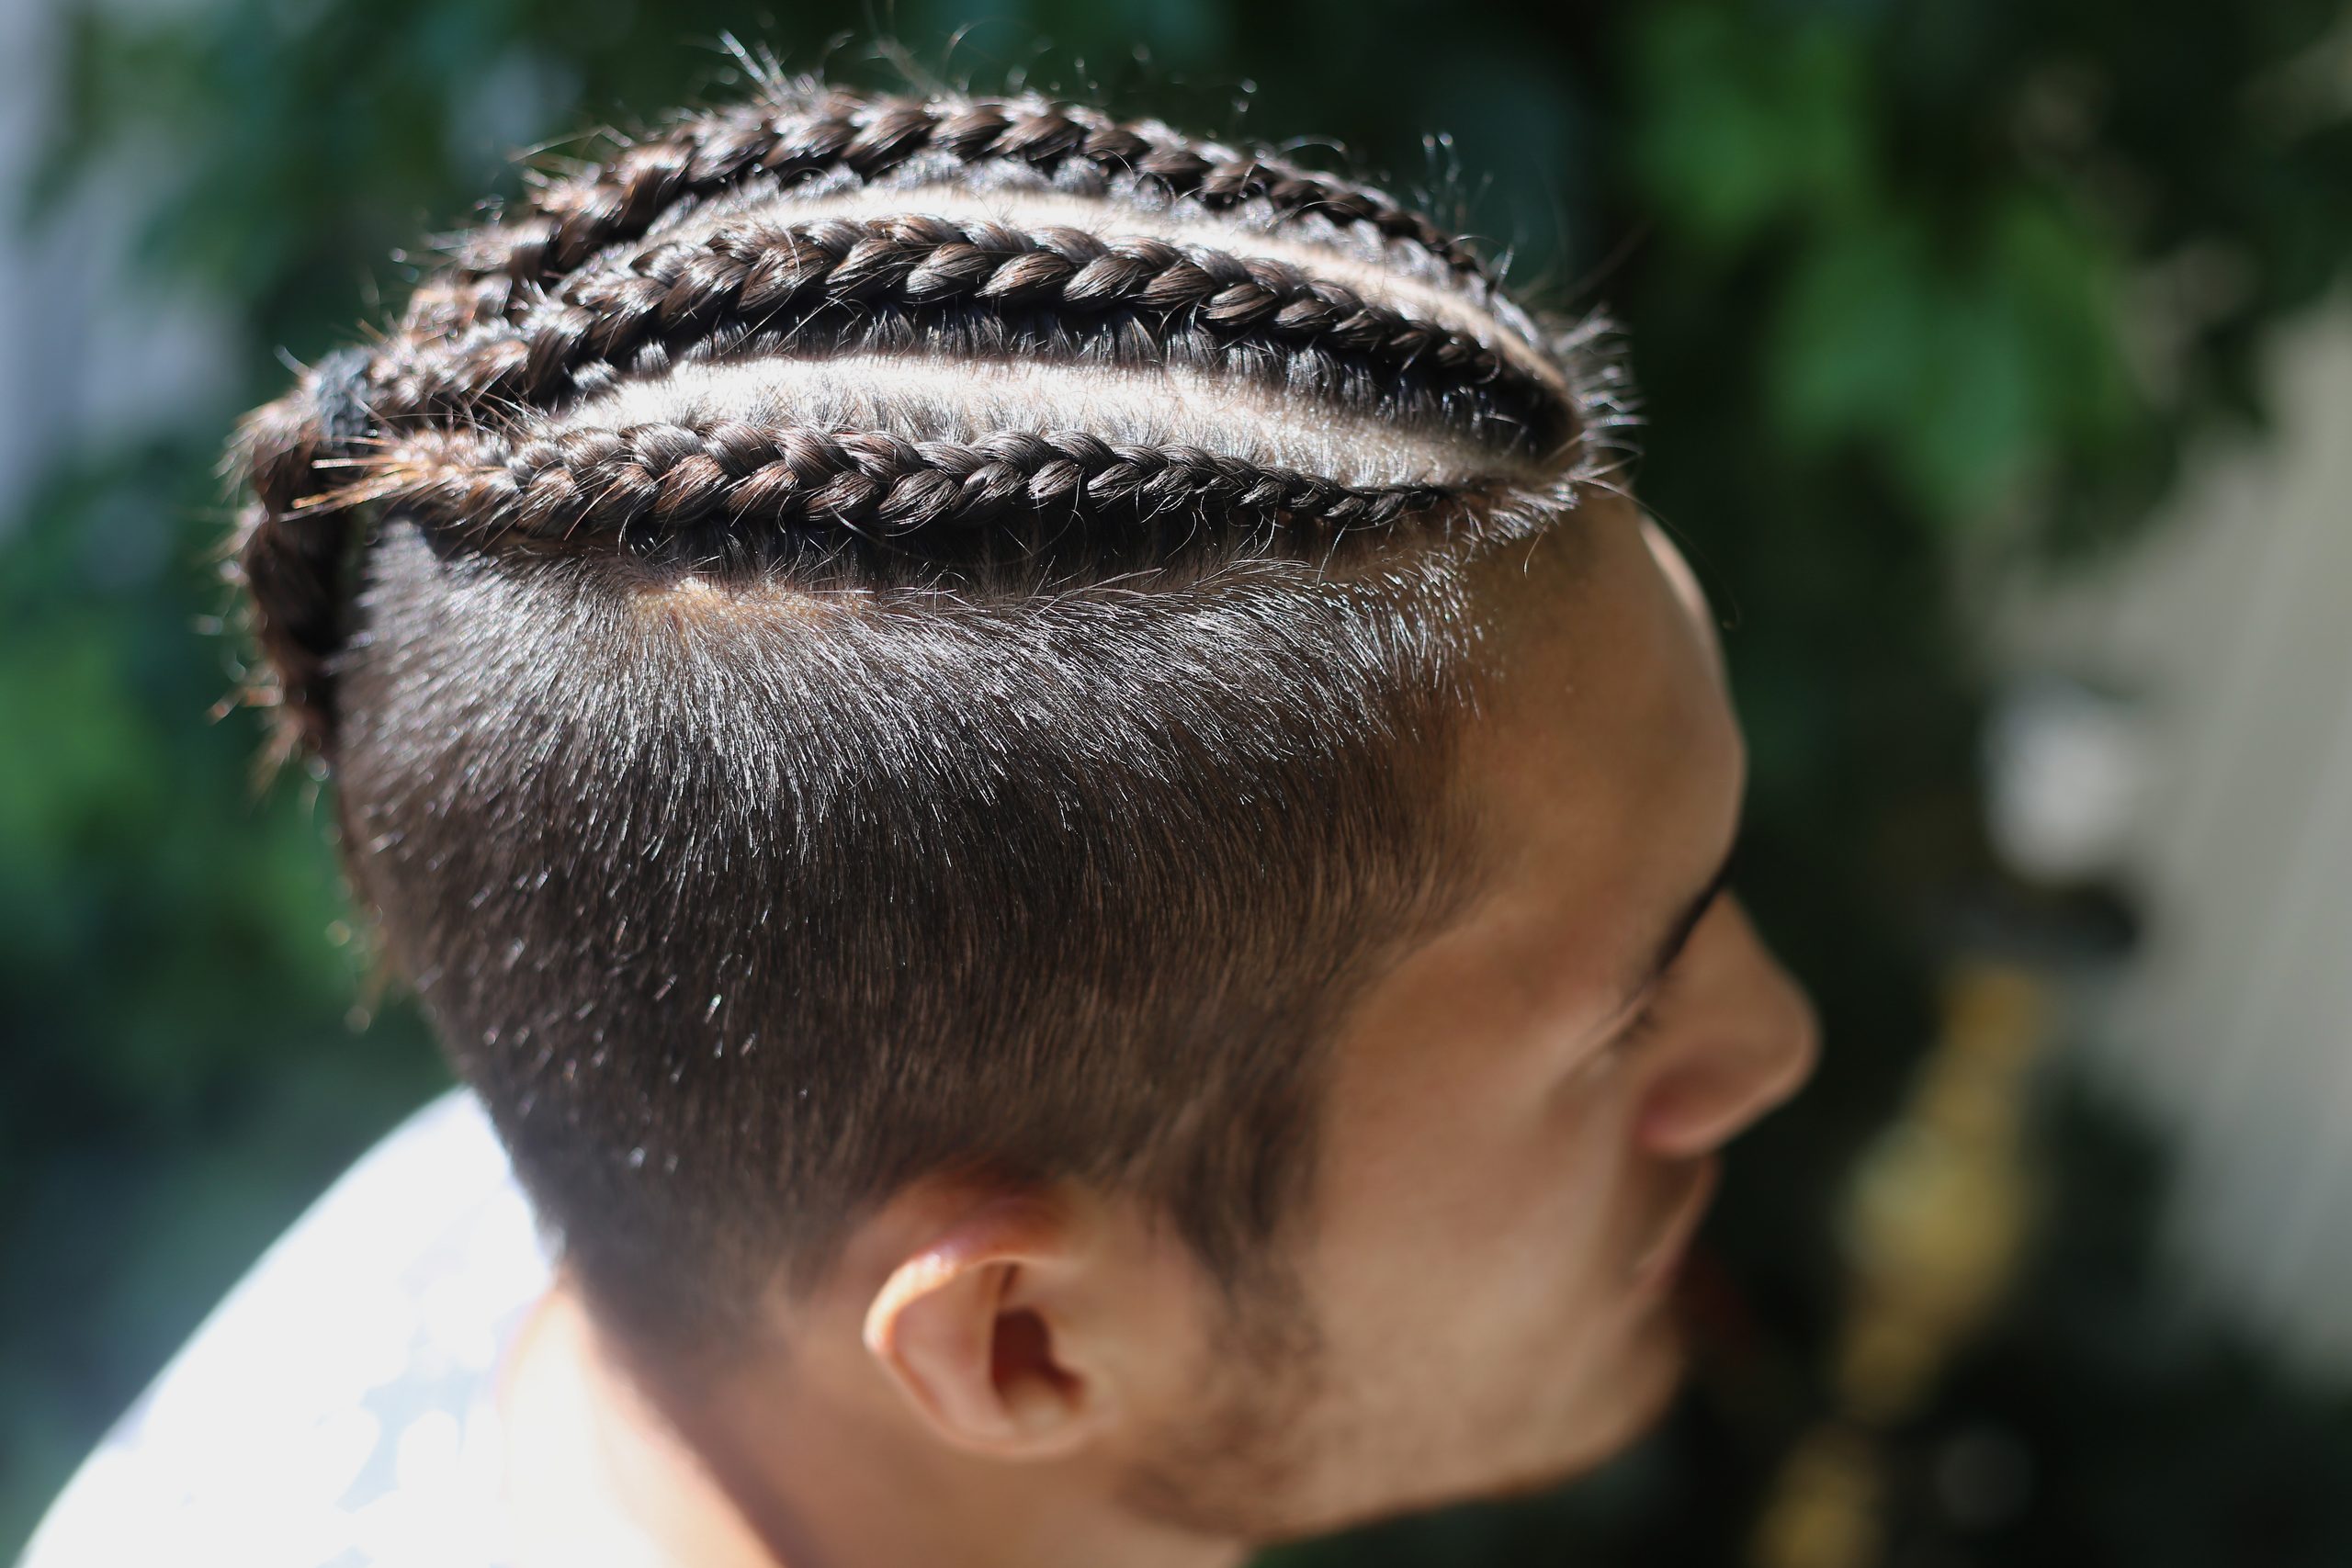 head man close-up, close-up frame of braids, hair braided into tight braids, ranks on his head, big partings